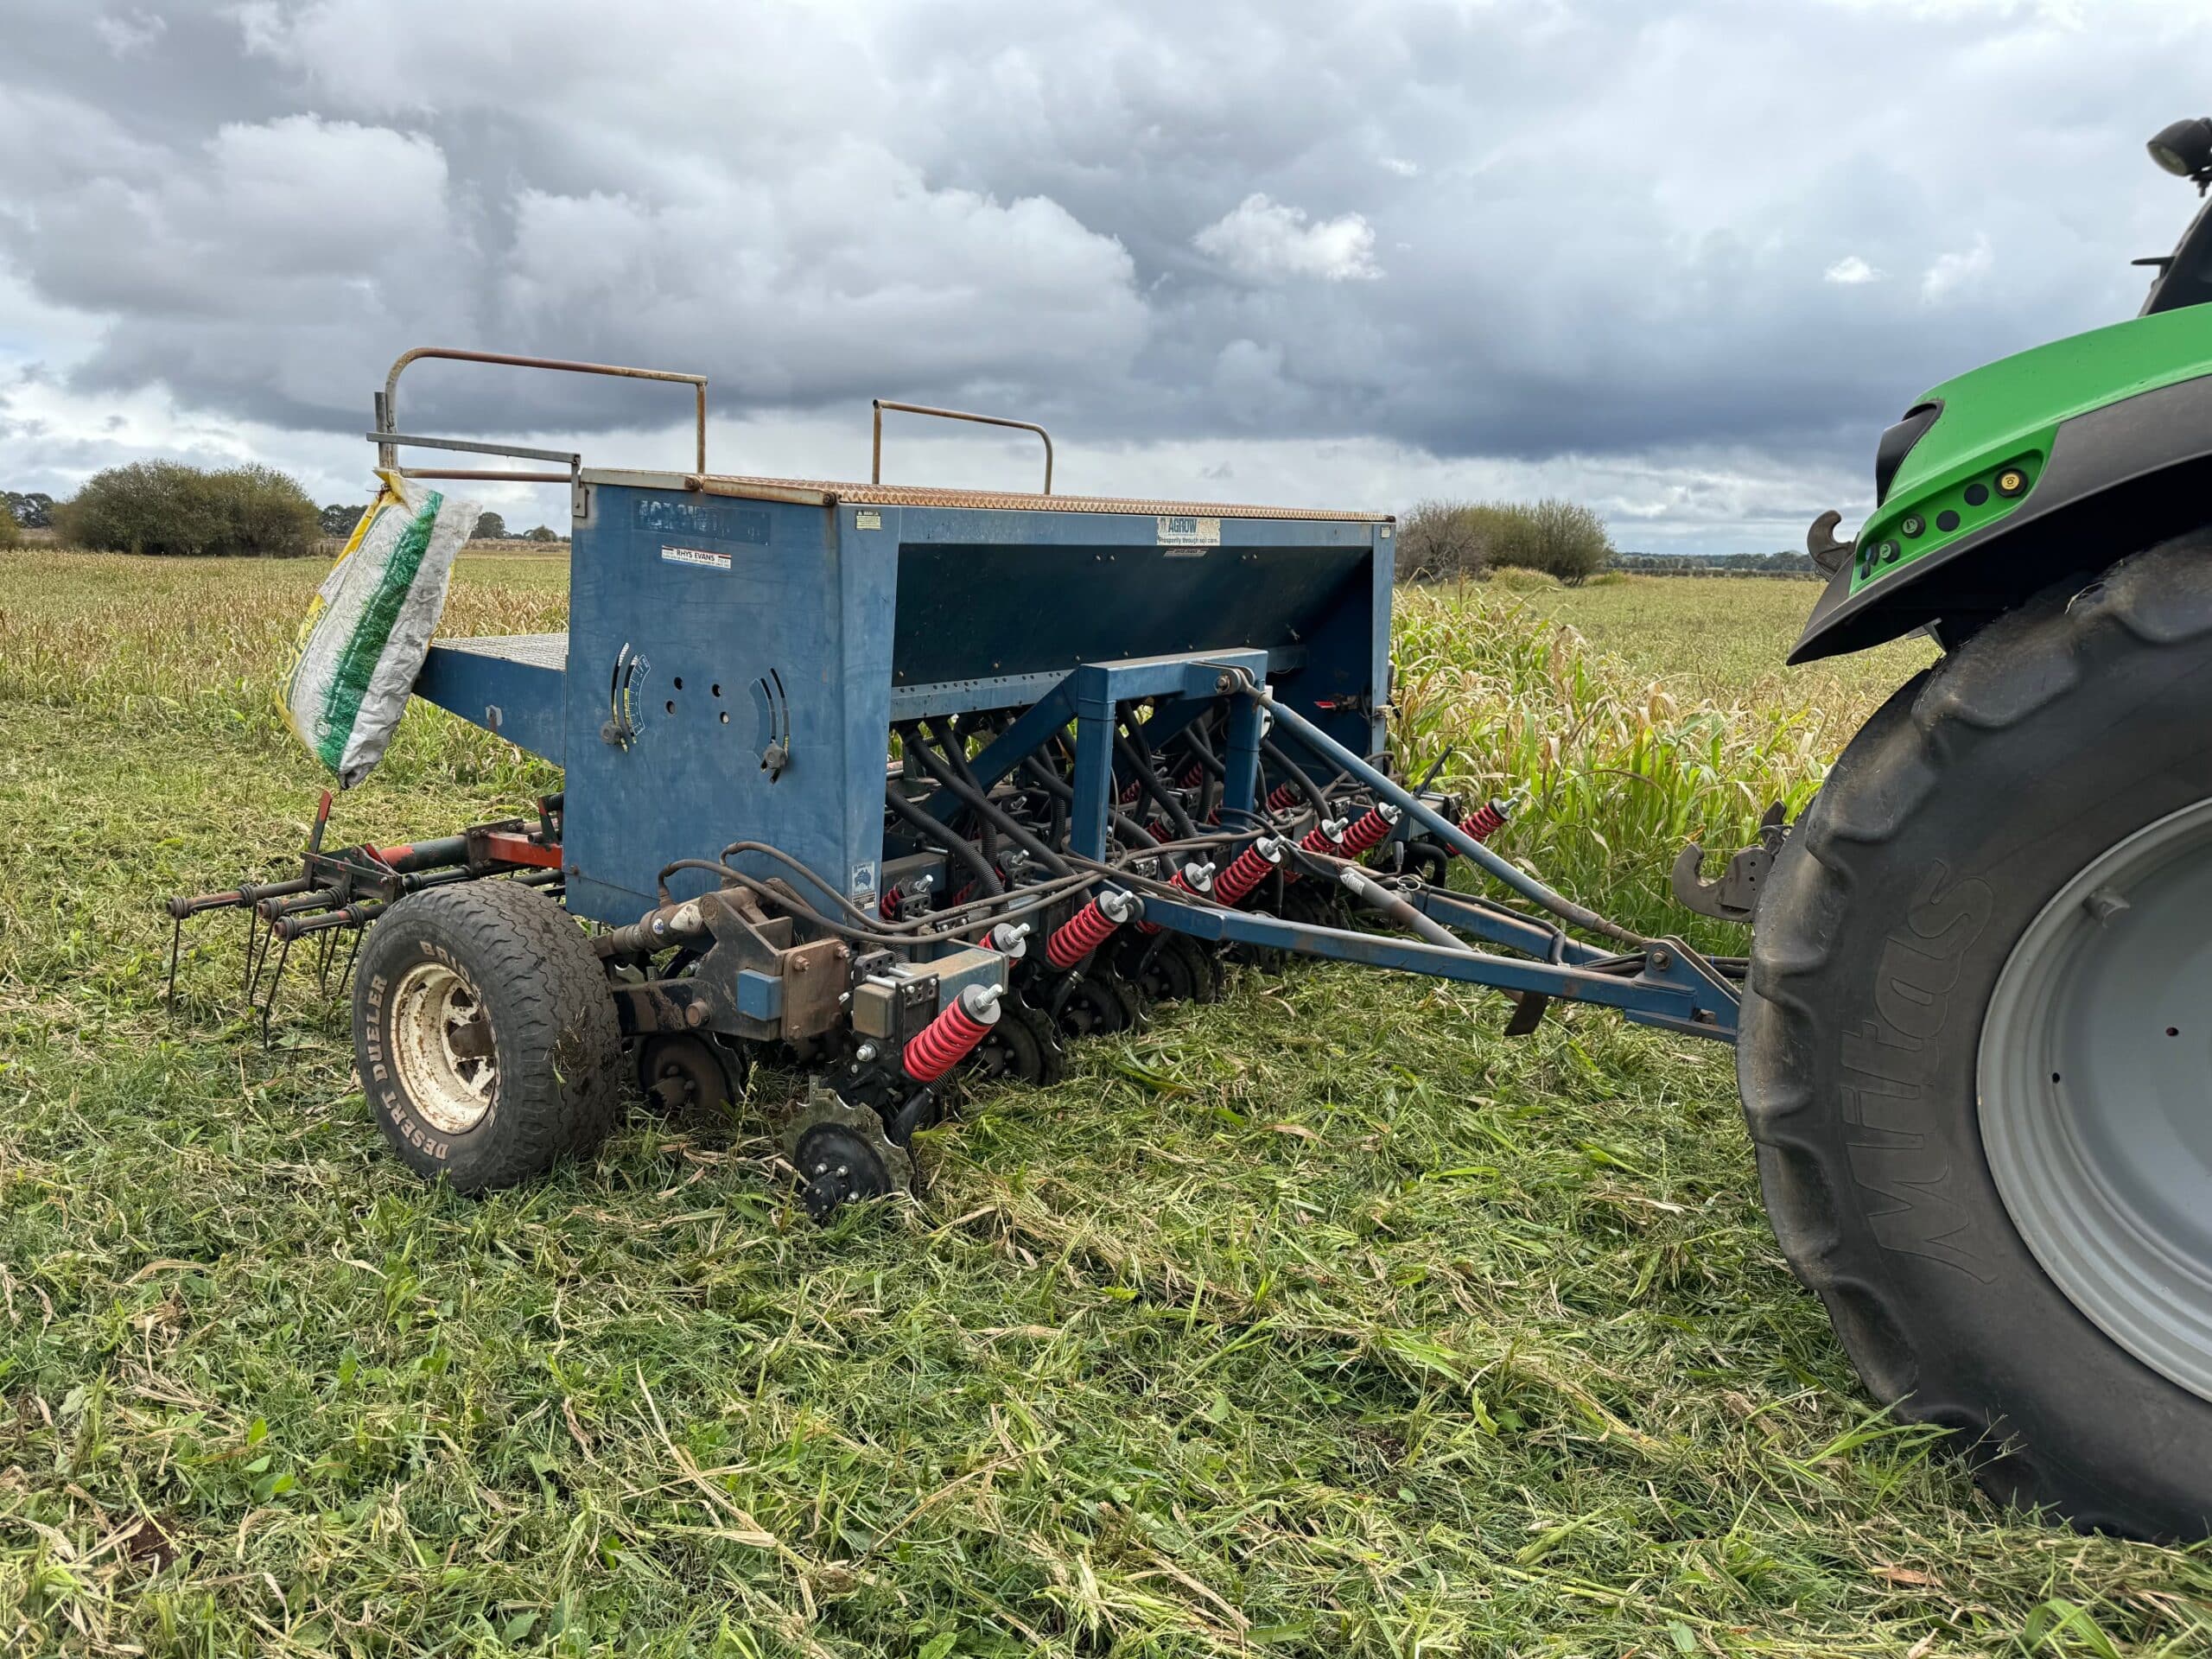 Agrowdrill for beef cattle farming